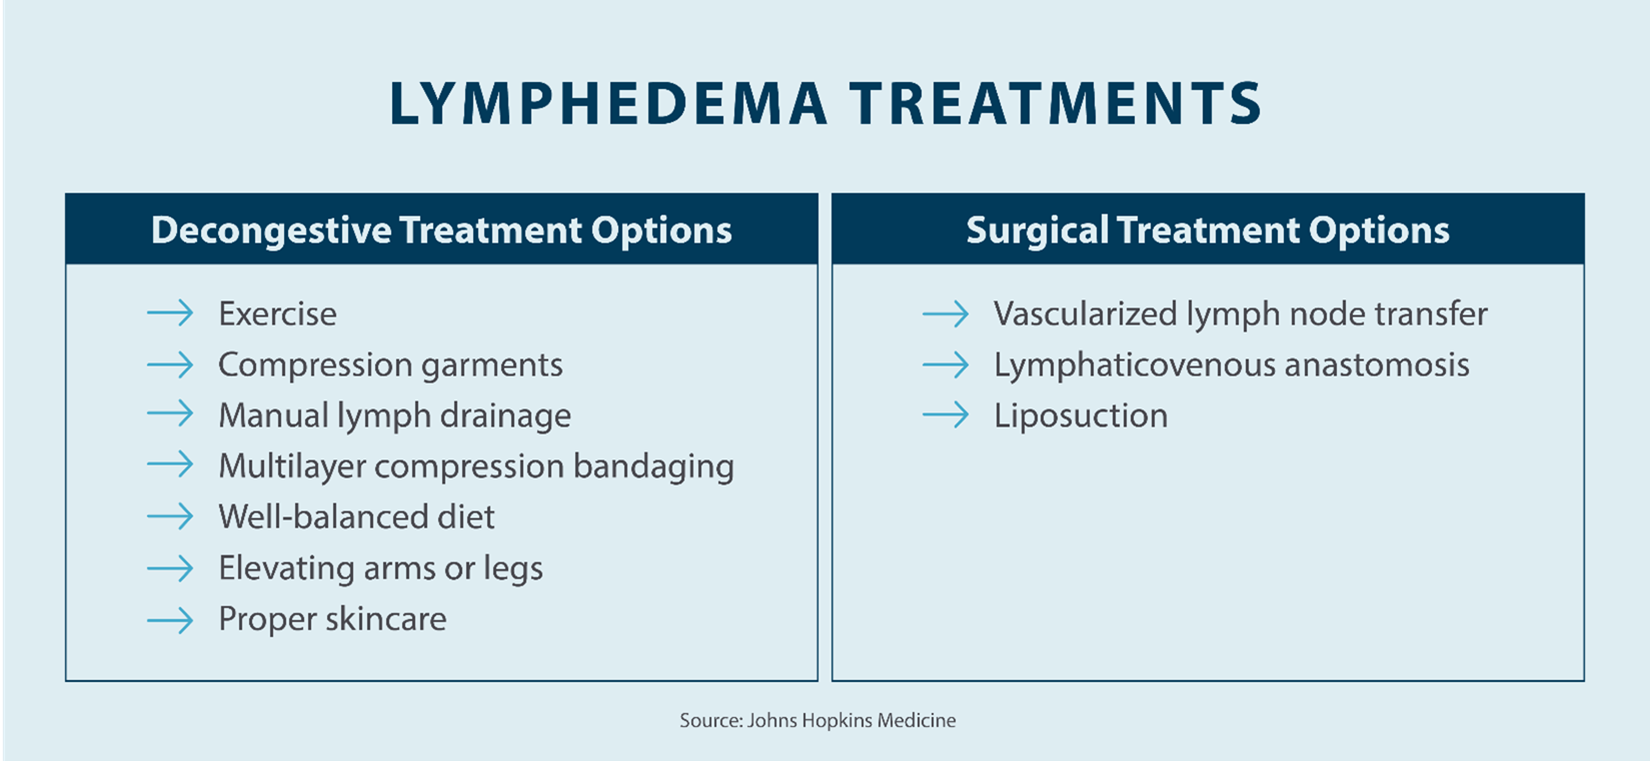 image of lymphedema treatments